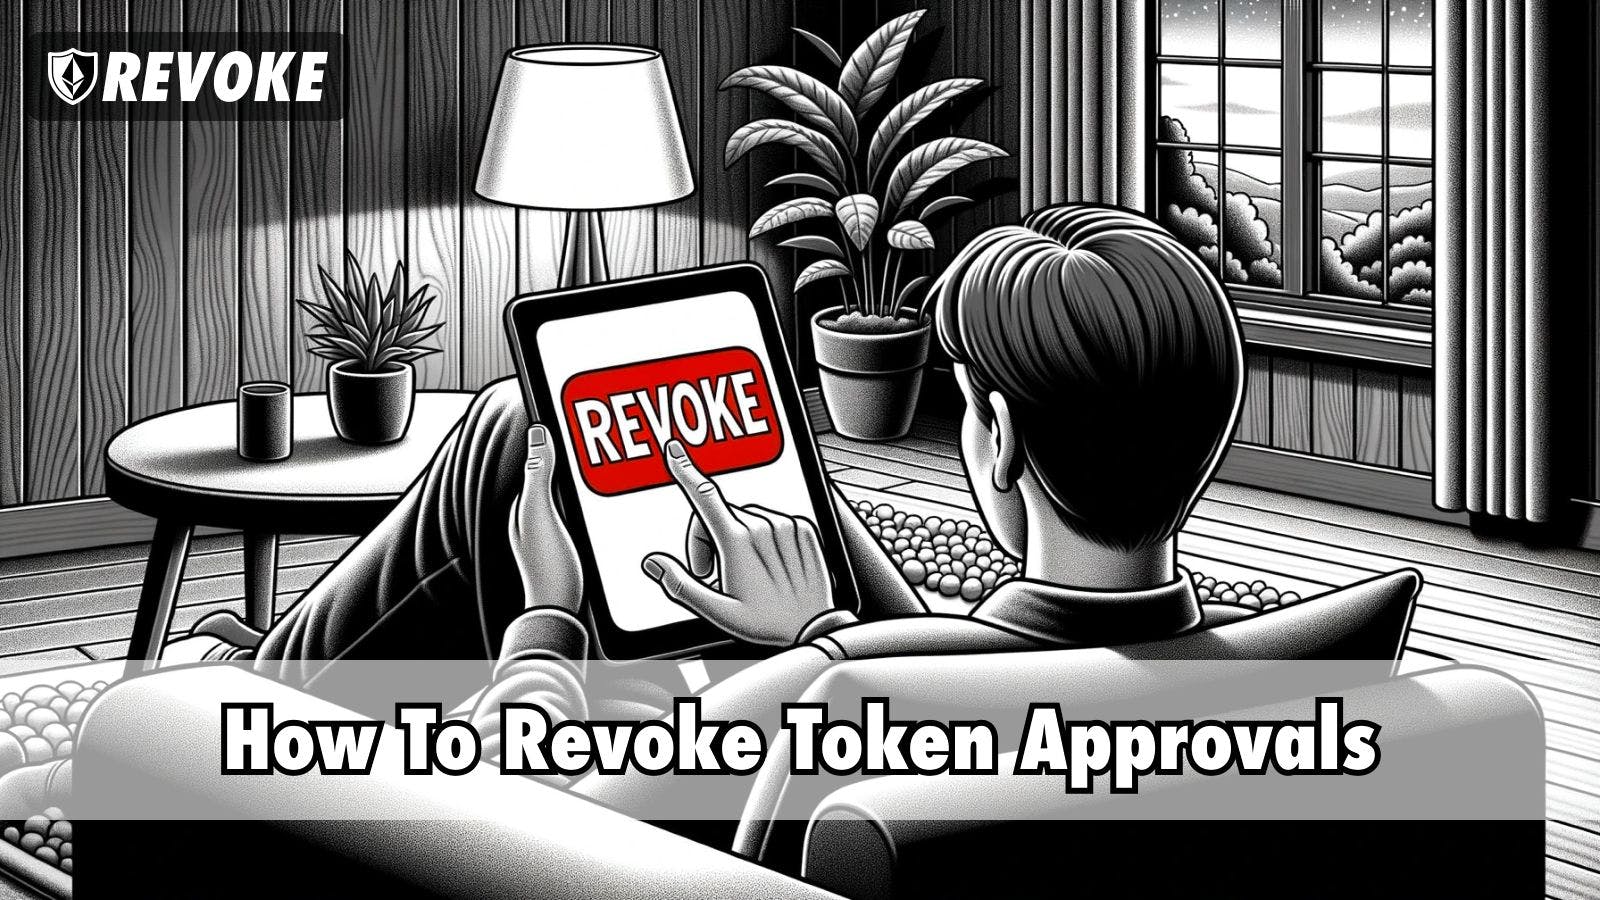 How to Revoke Token Approvals and Permissions